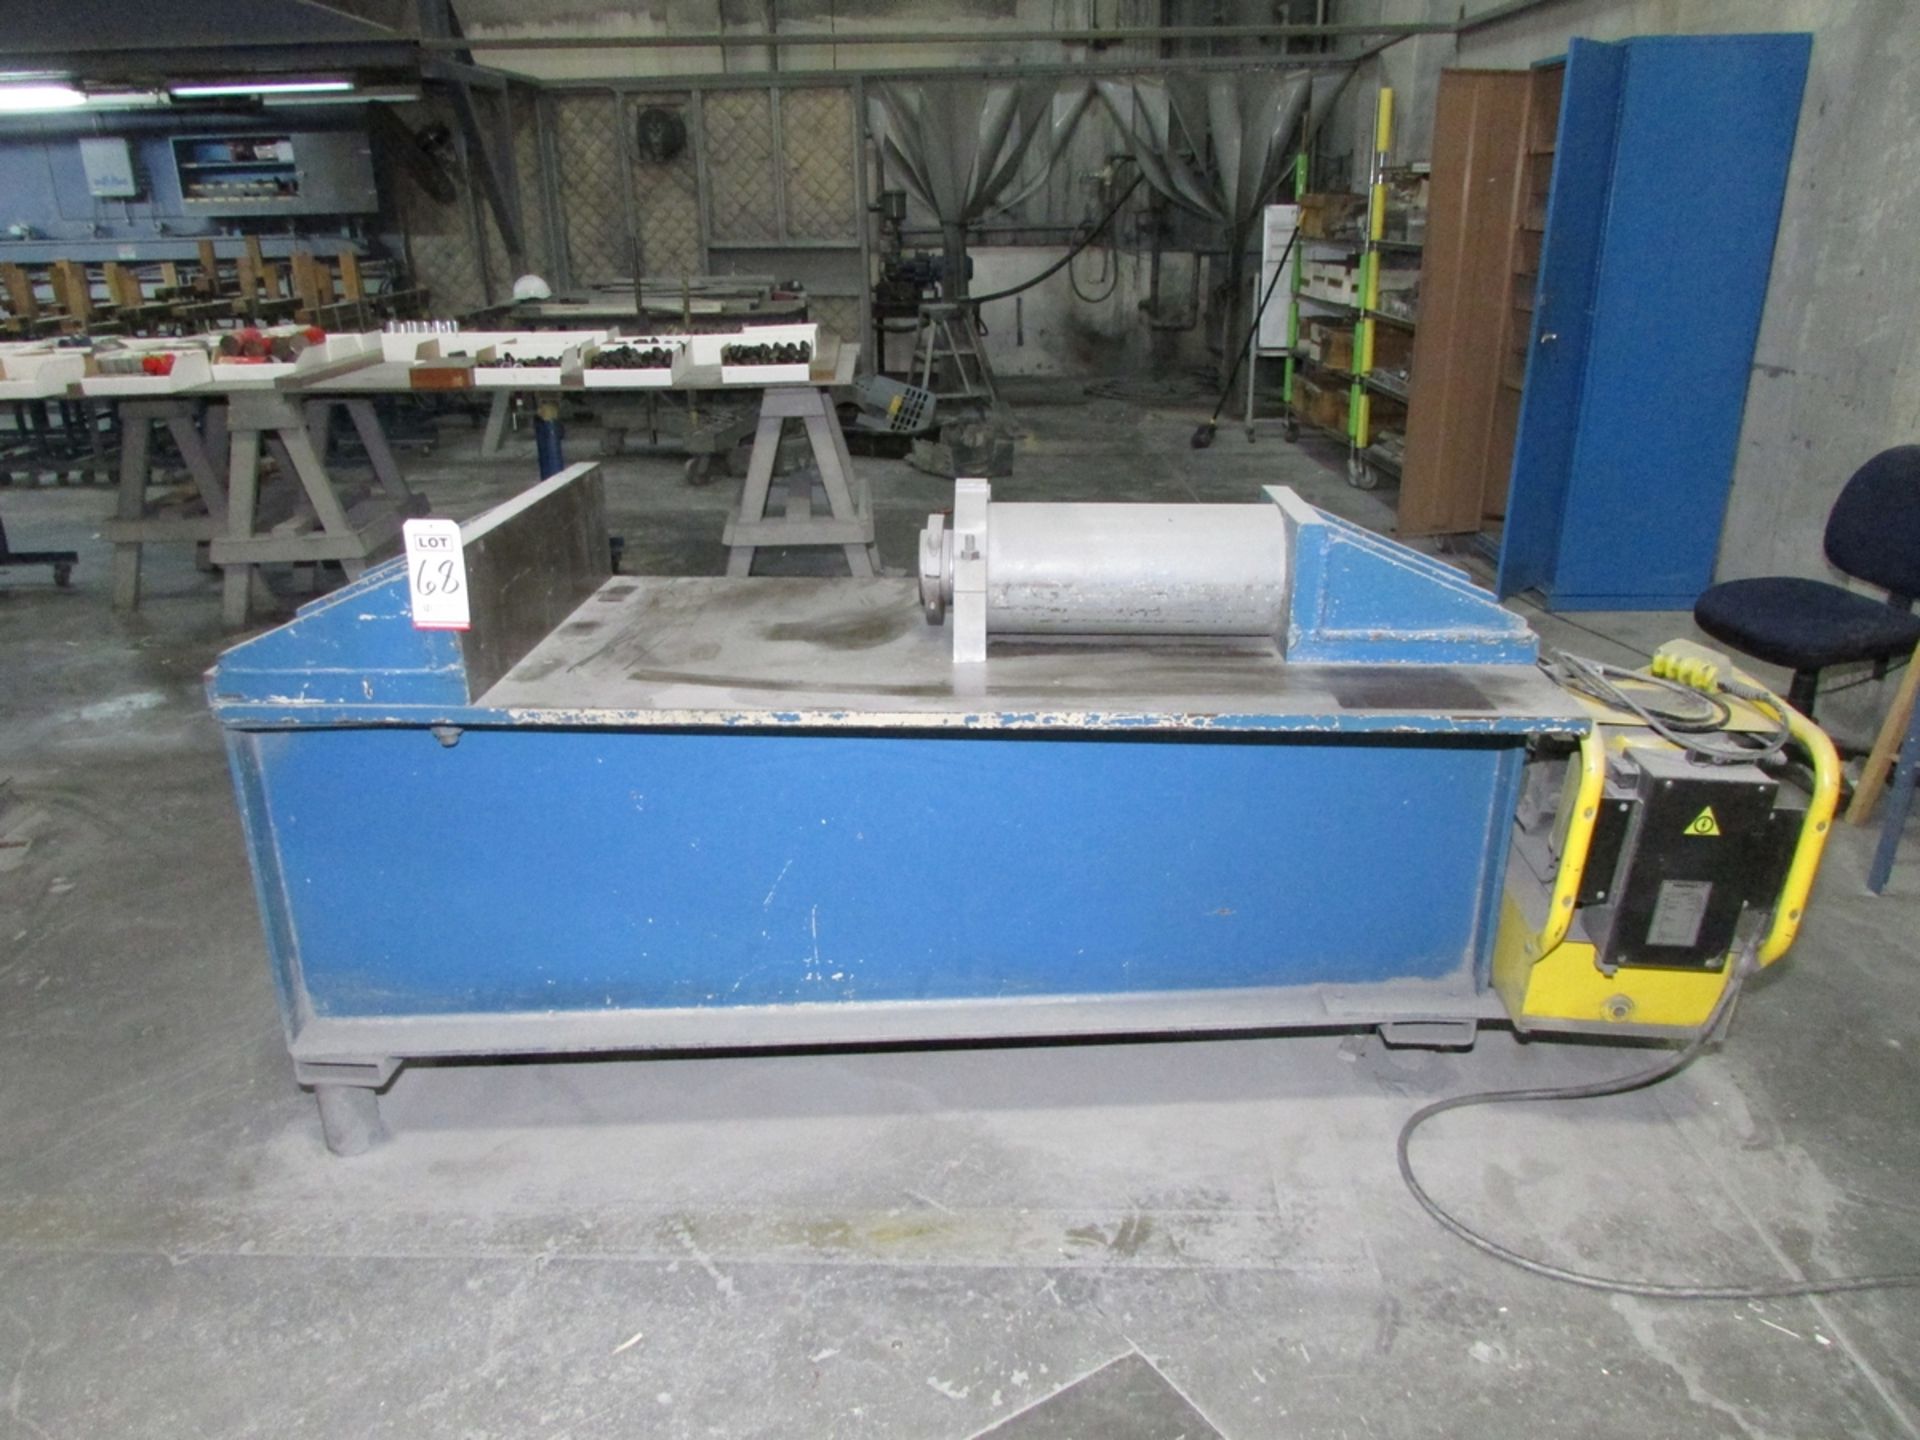 HORIZONTAL HYDRAULIC STRAIGHTENING PRESS, 30" X 9" ANGLE PLATE, 80" X 30" TABLE, ENERPAC GPER5320J - Image 2 of 12